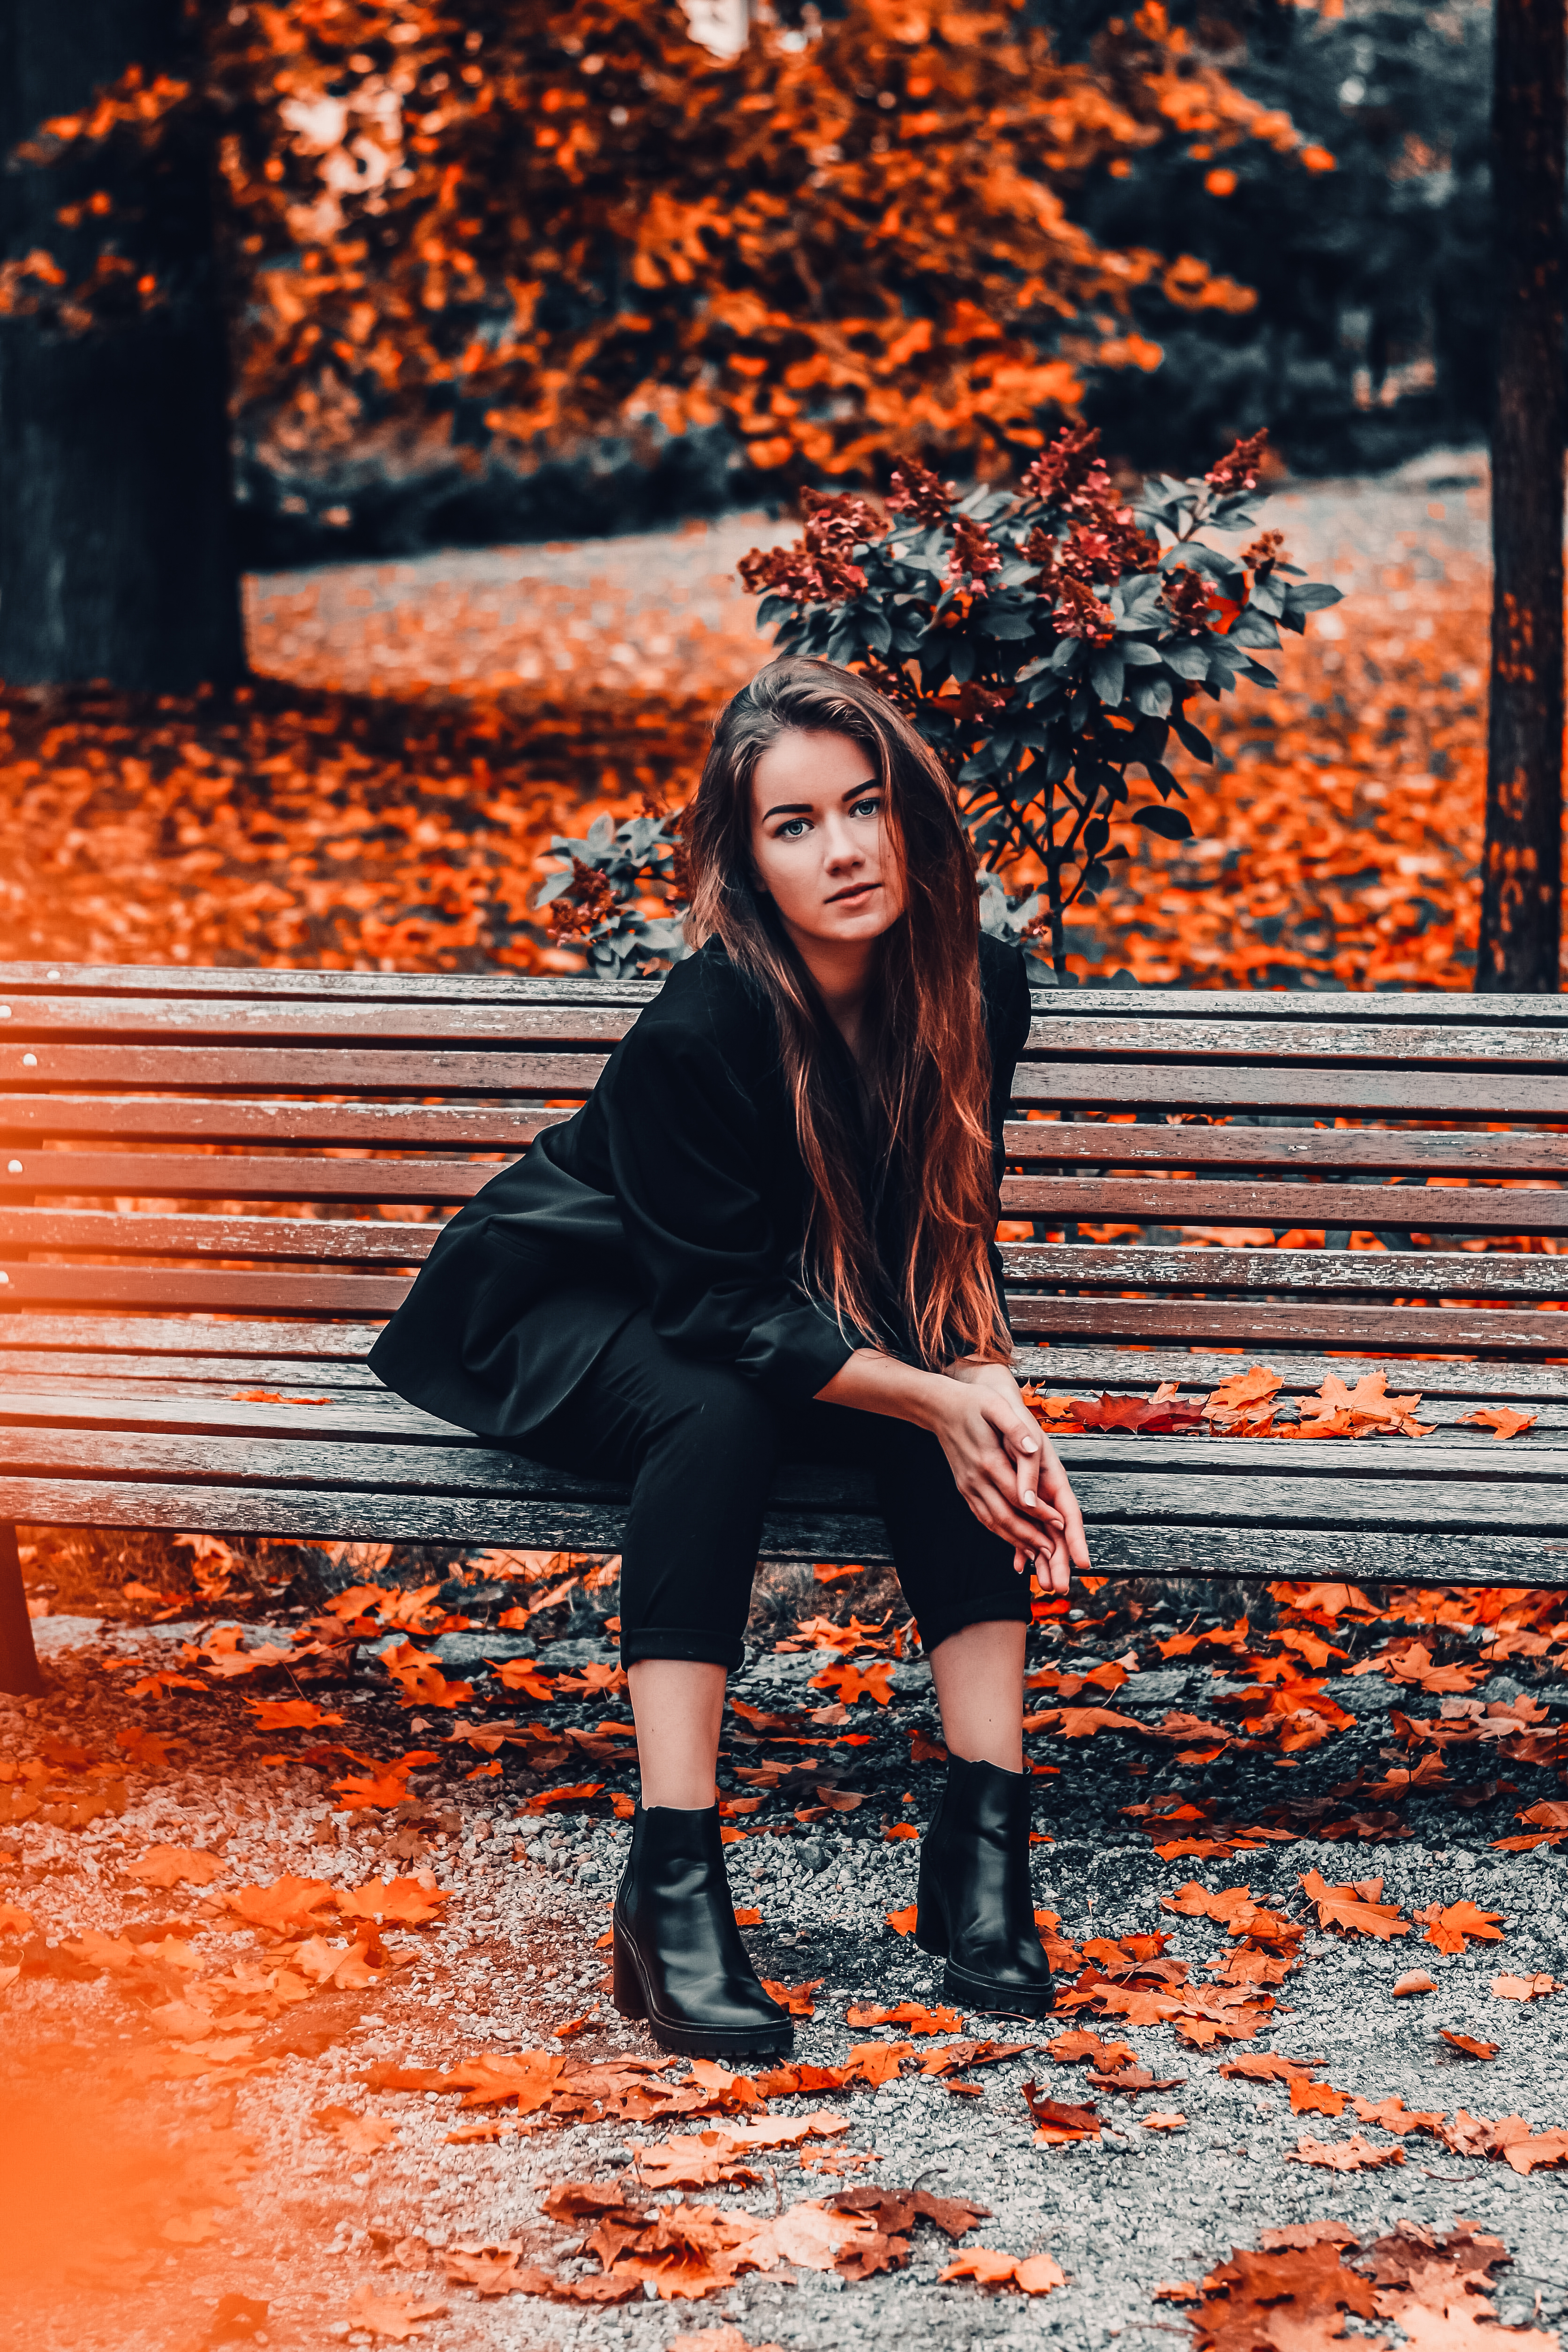 Fall Presets Mobile 1-5